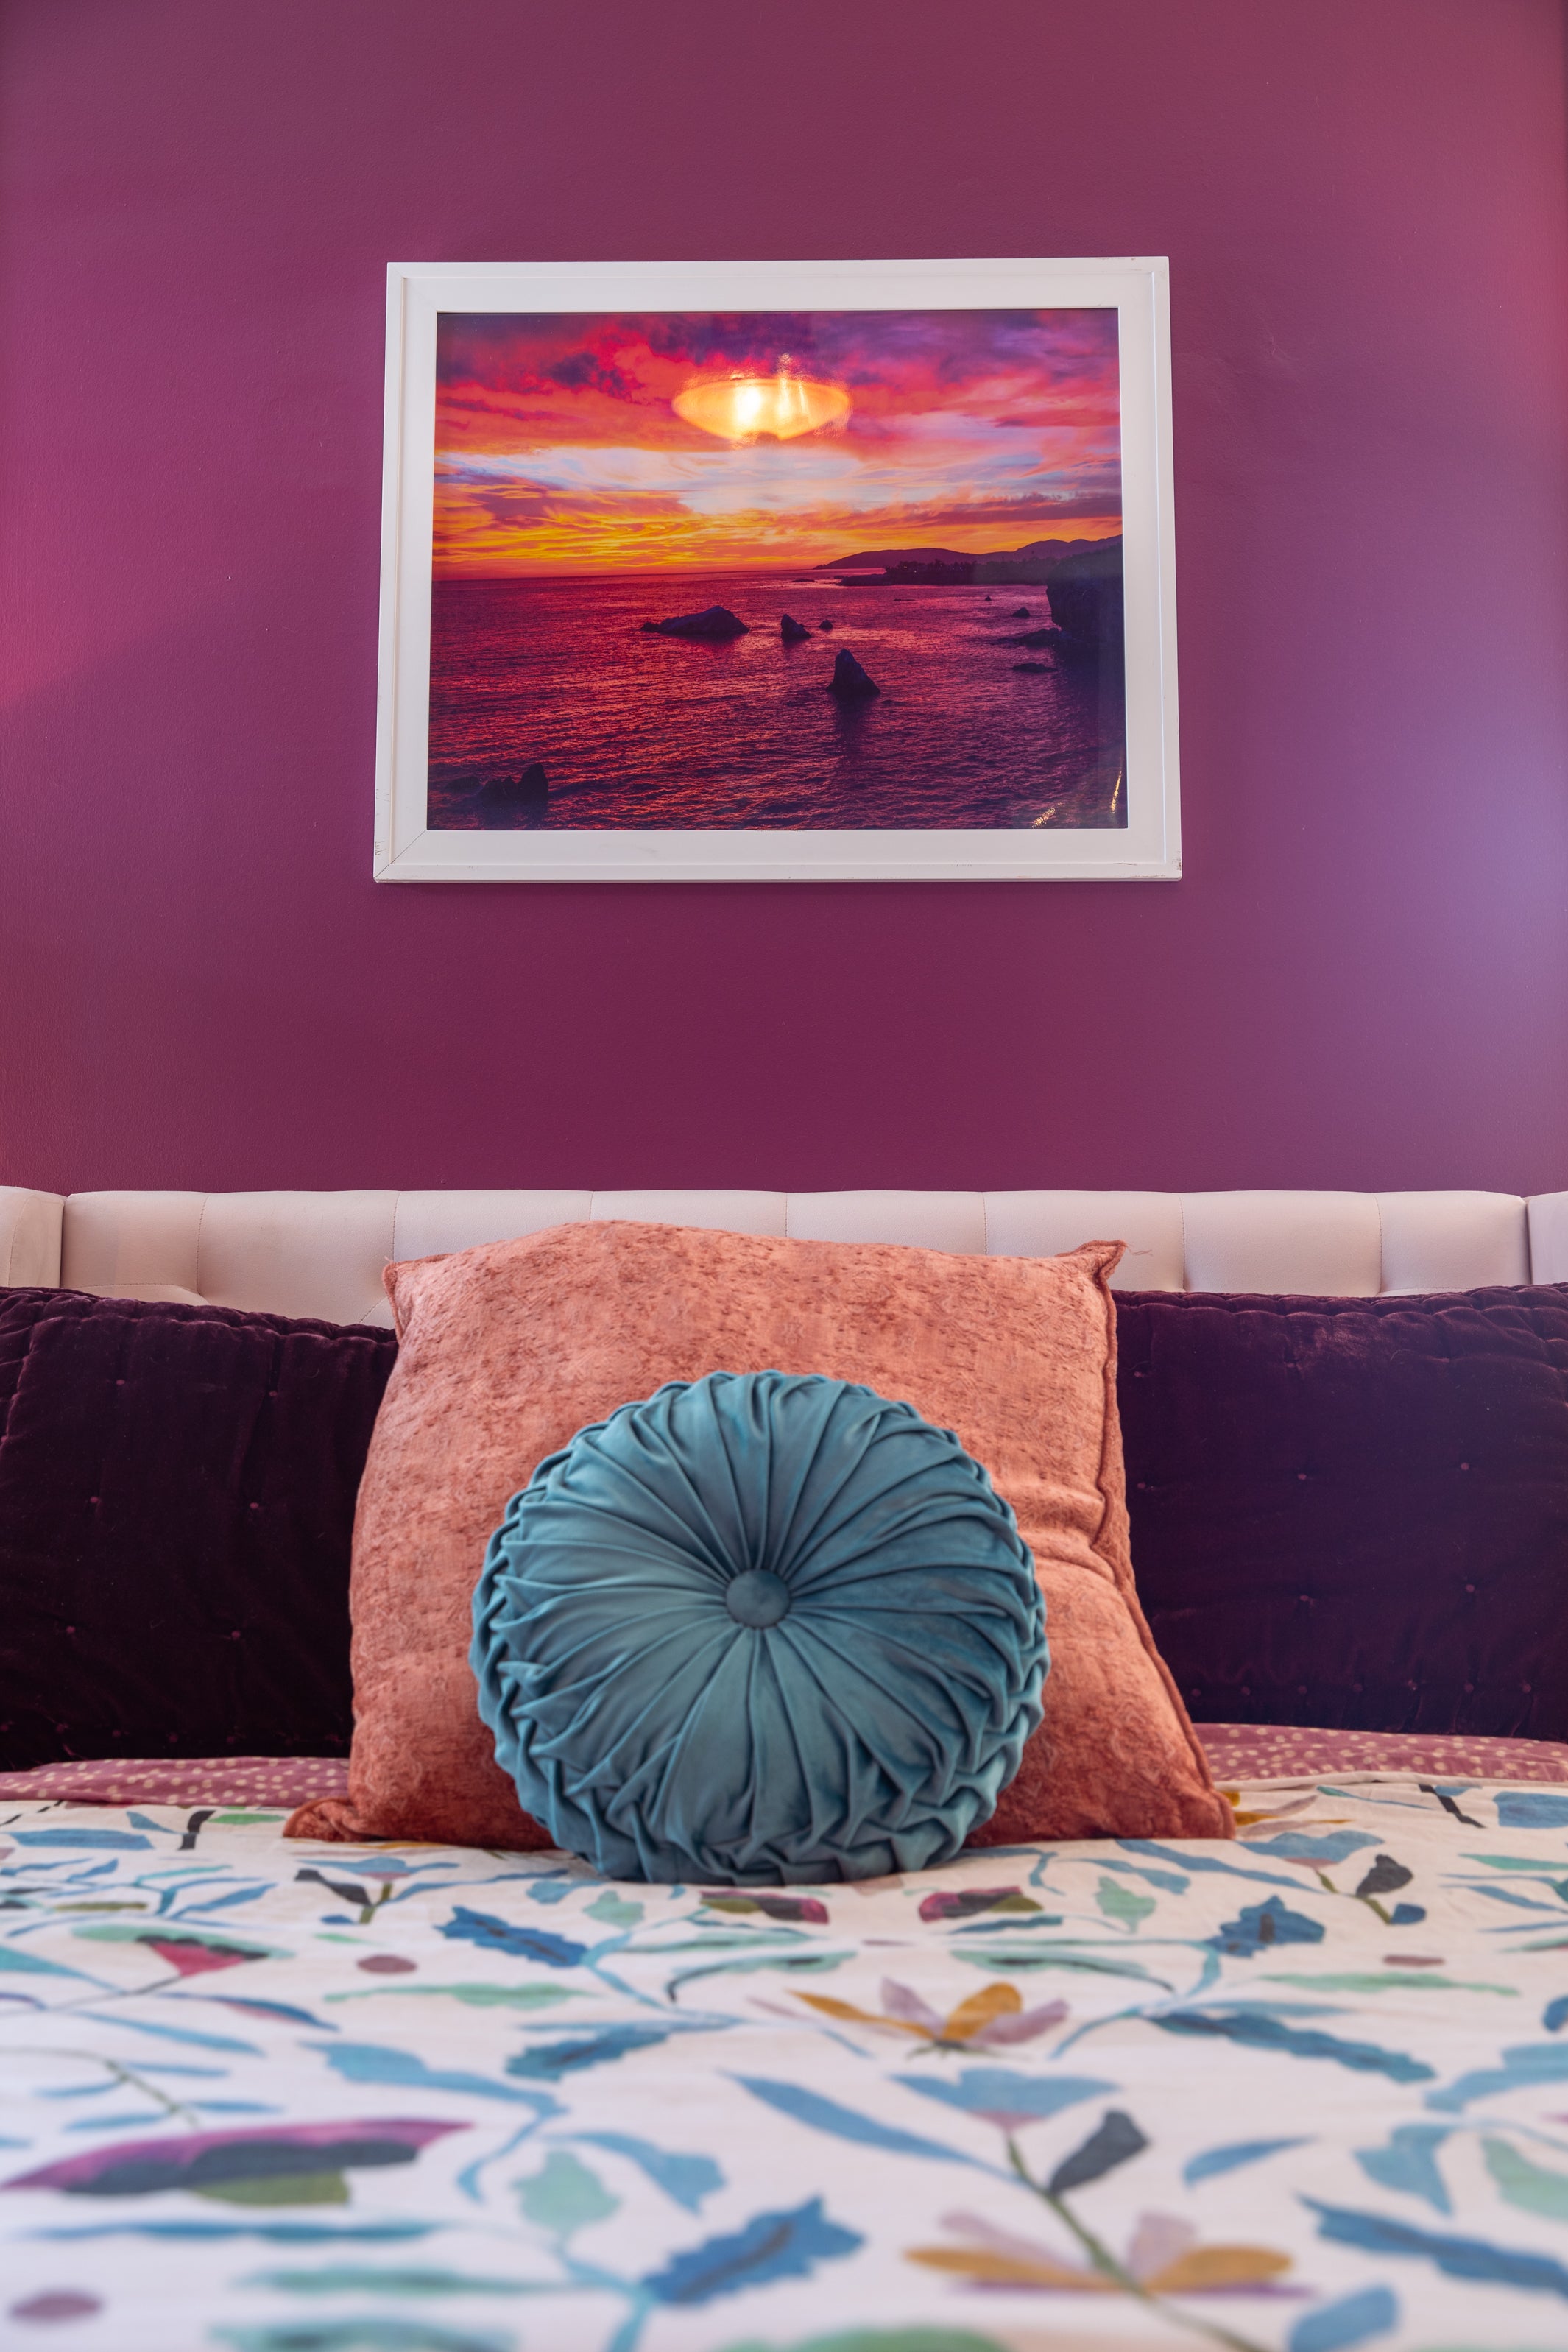 CALIFORNIA FIRE SUNSET PHOTOGRAPHY PRINT over bed